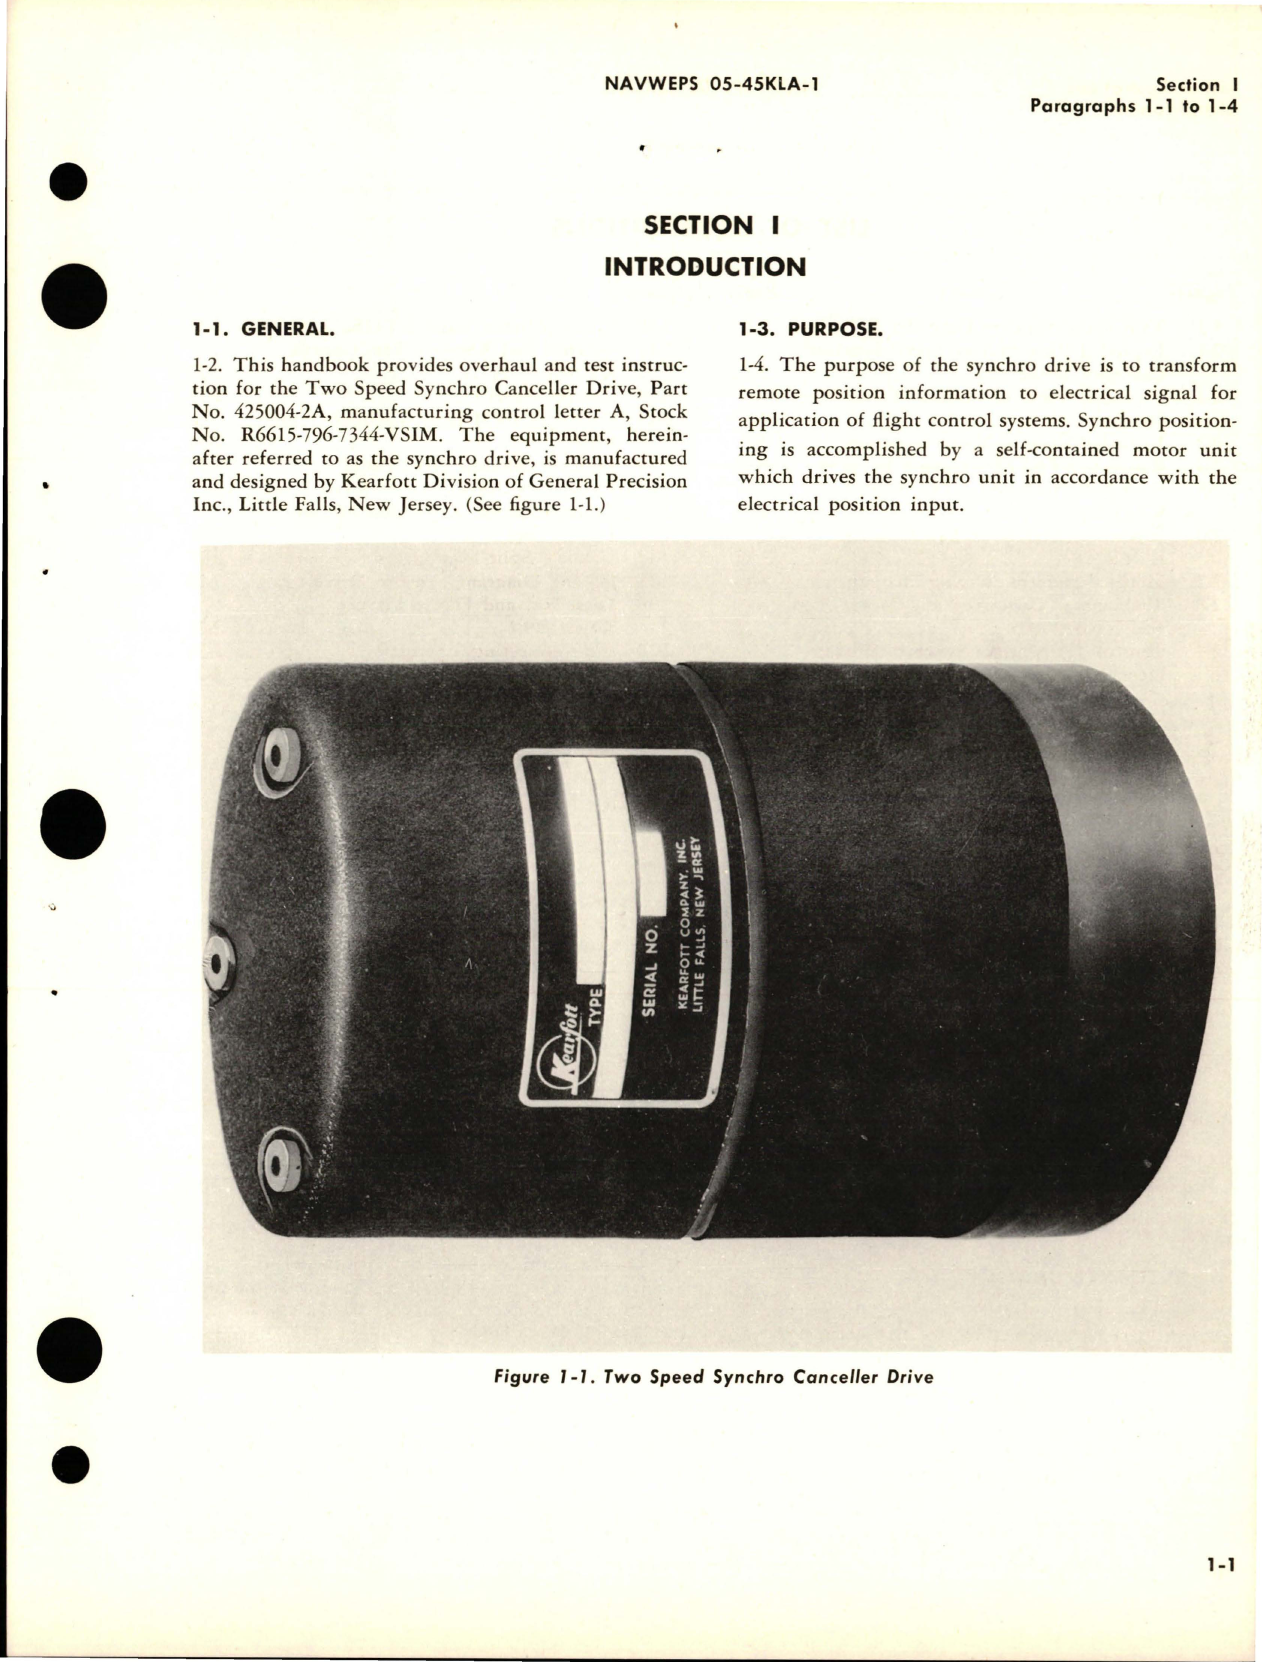 Sample page 5 from AirCorps Library document: Overhaul Instructions for Two Speed Synchro Canceller Drive - Part 425004-2A